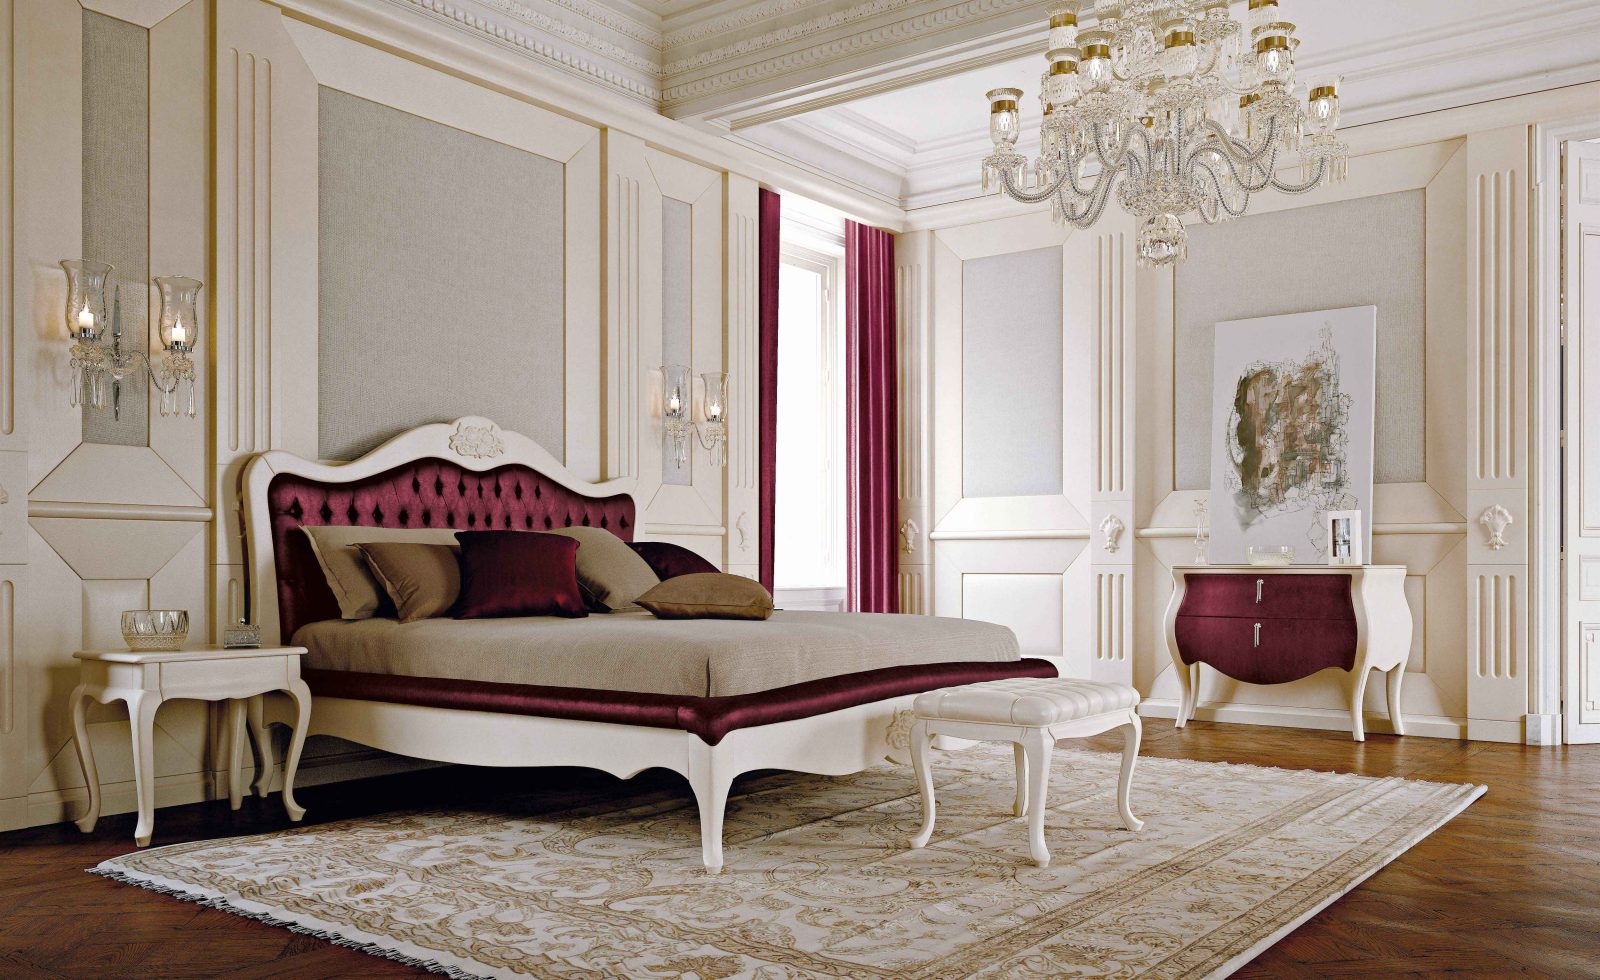 Ruby Red Parisian Style for Luisa Mascheroni's Valentine's Bedroom